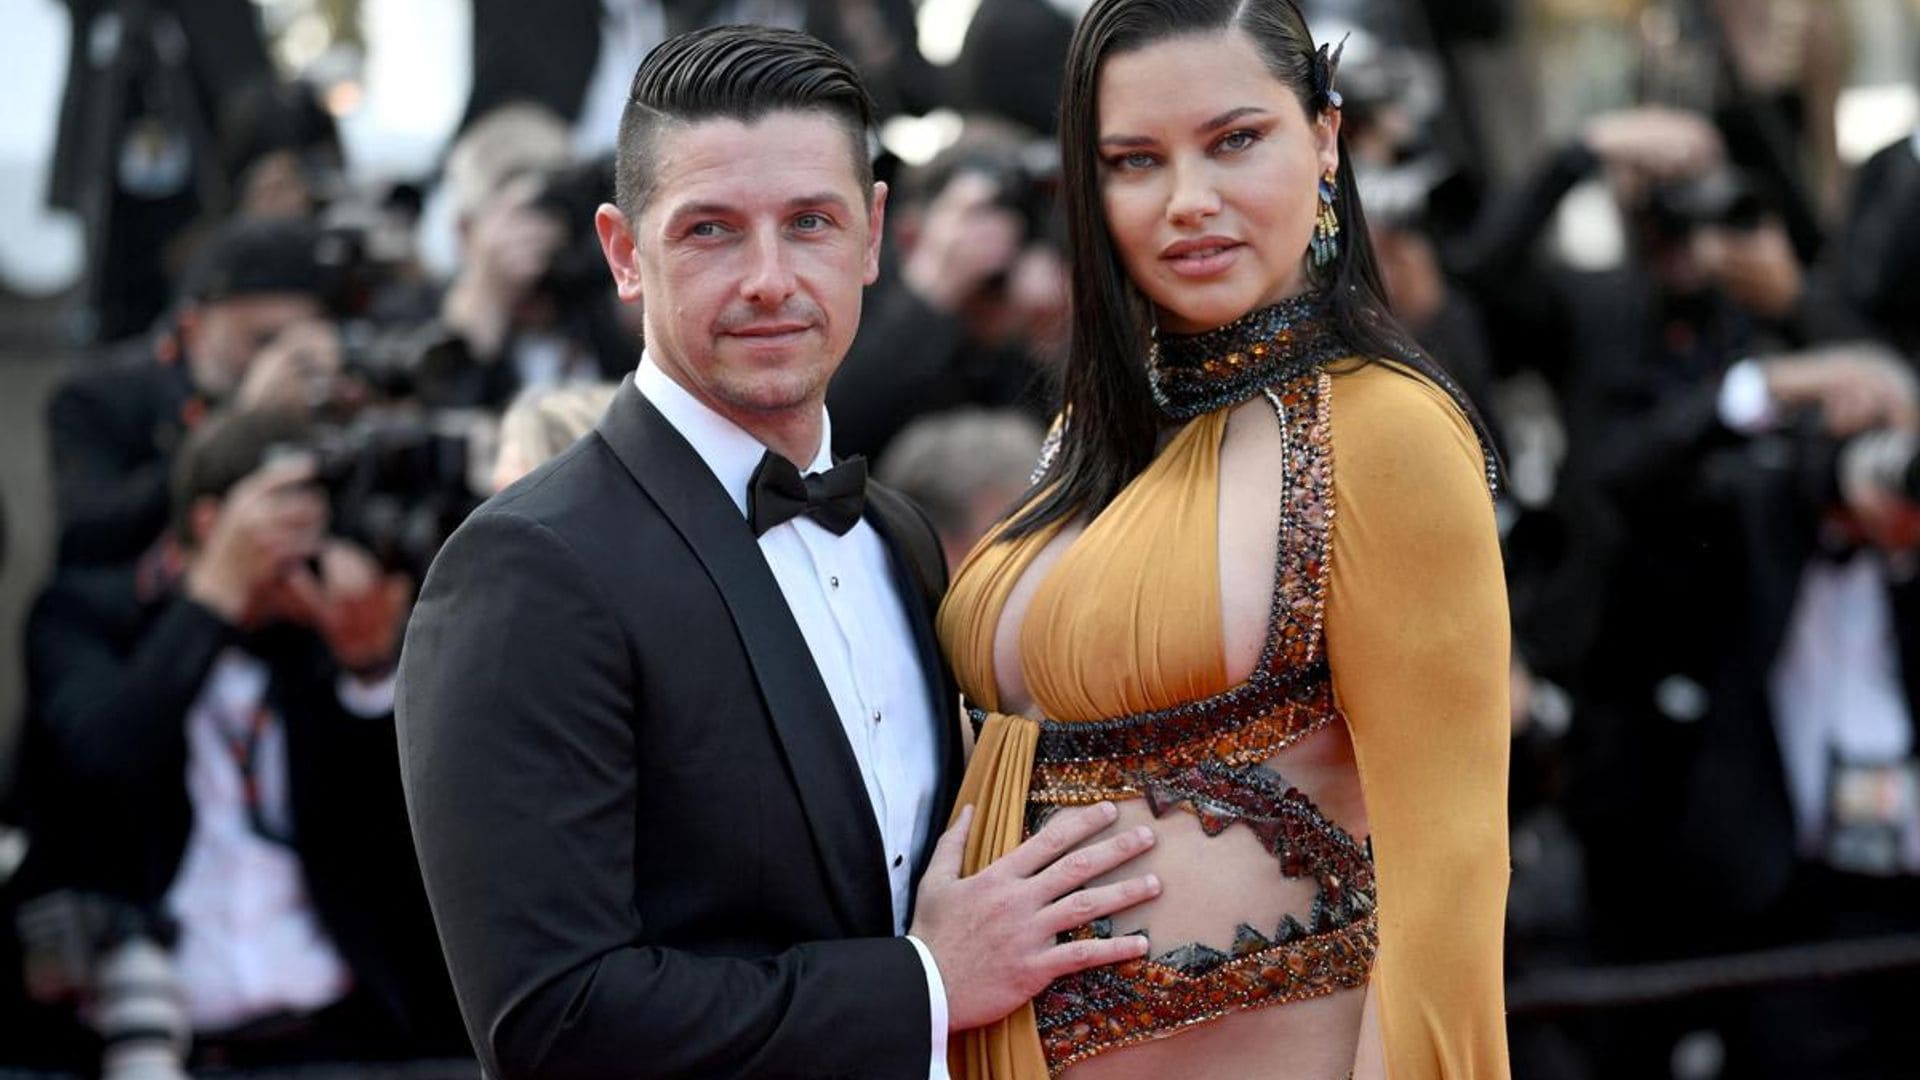 Adriana Lima reveals the name of her new baby and the special meaning behind it